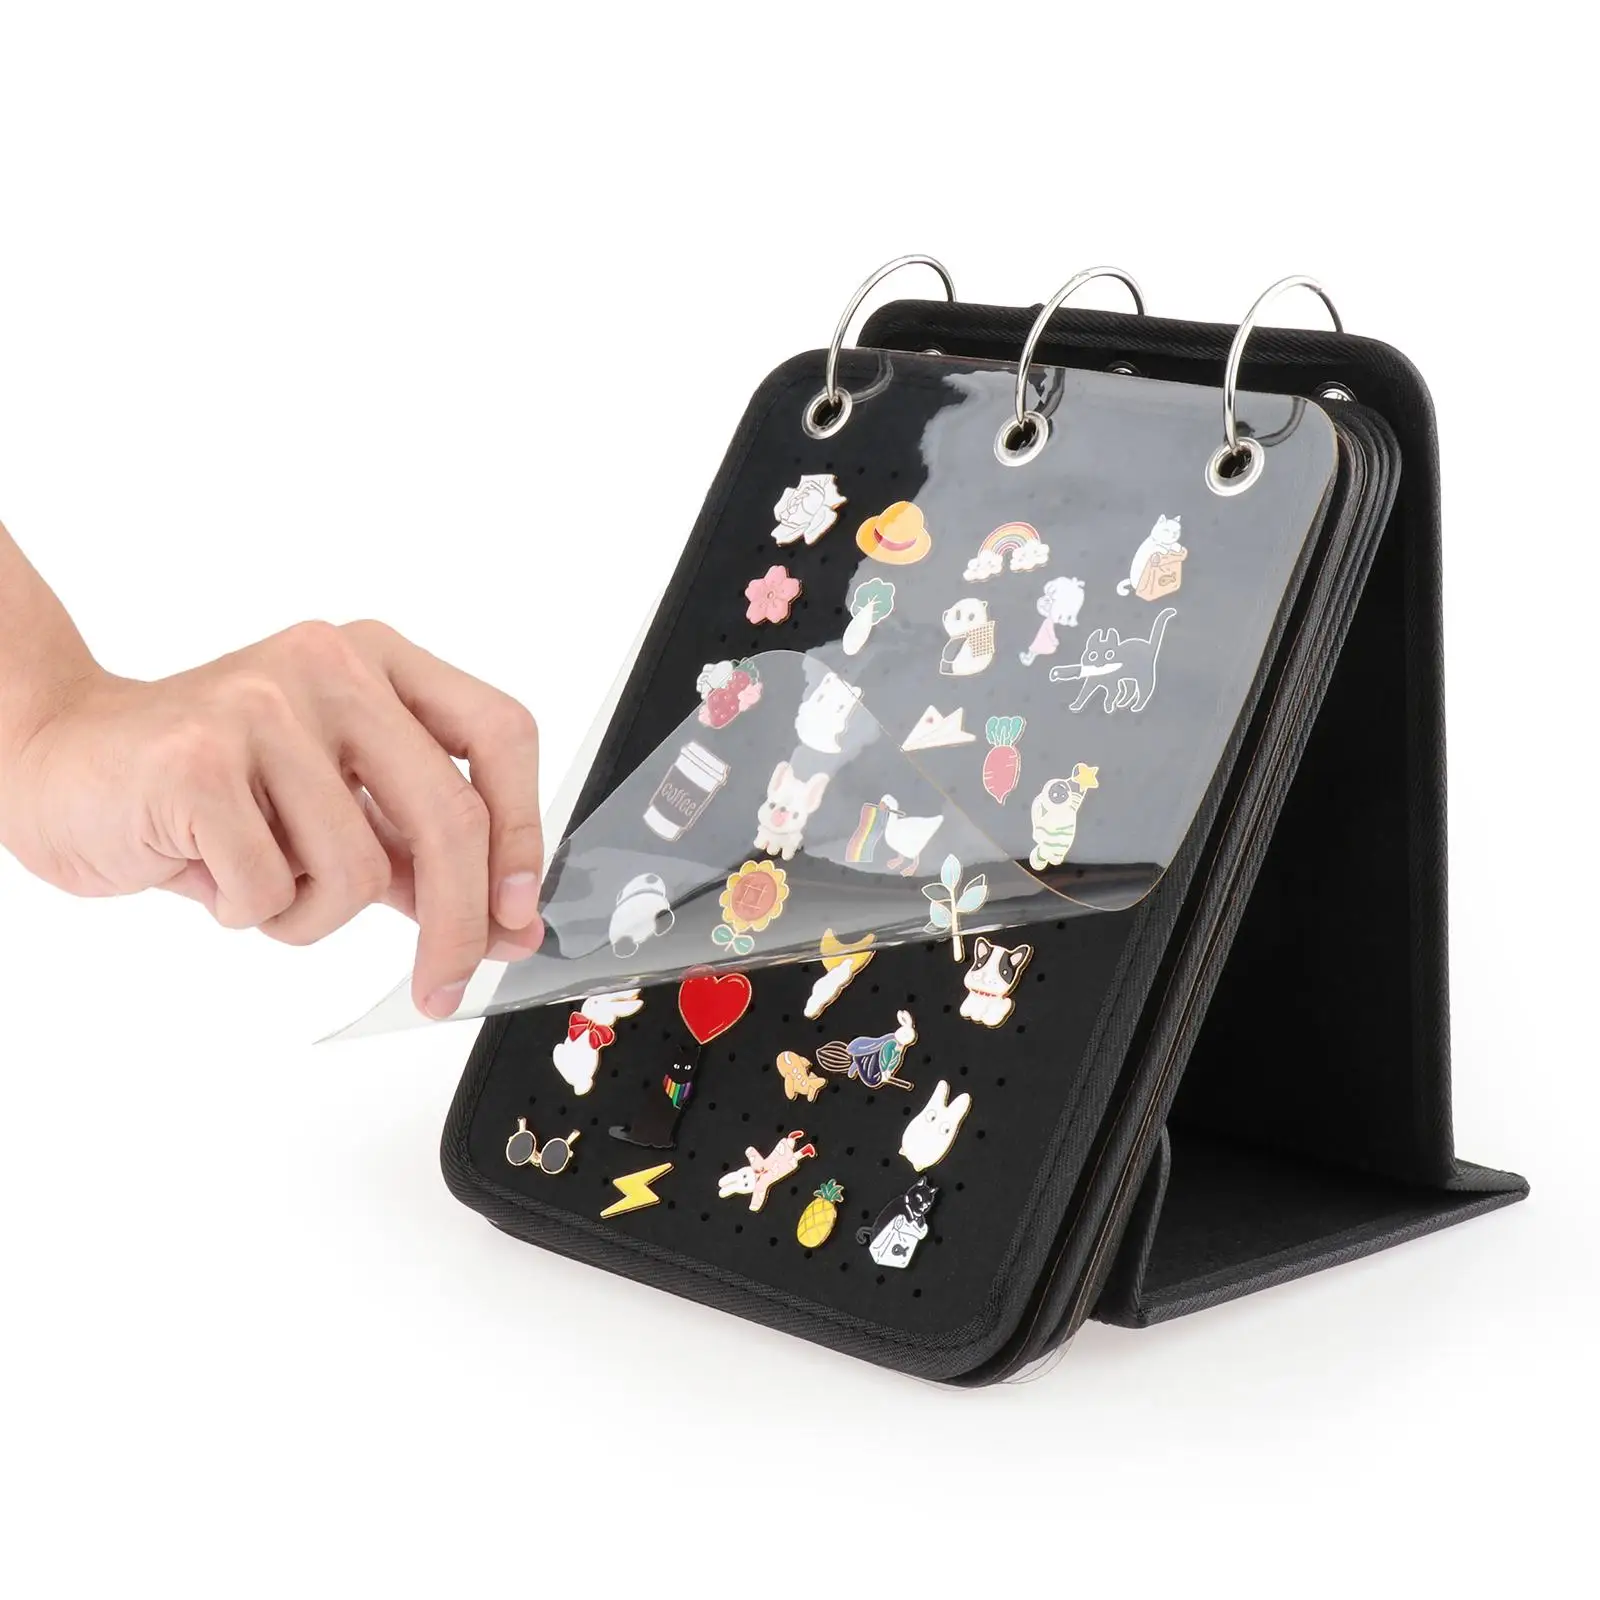 Pin Display Holder Pin Display Binder Stand Pin Display Stable Pins Collection Storage Calendar Stand for Dressing Table